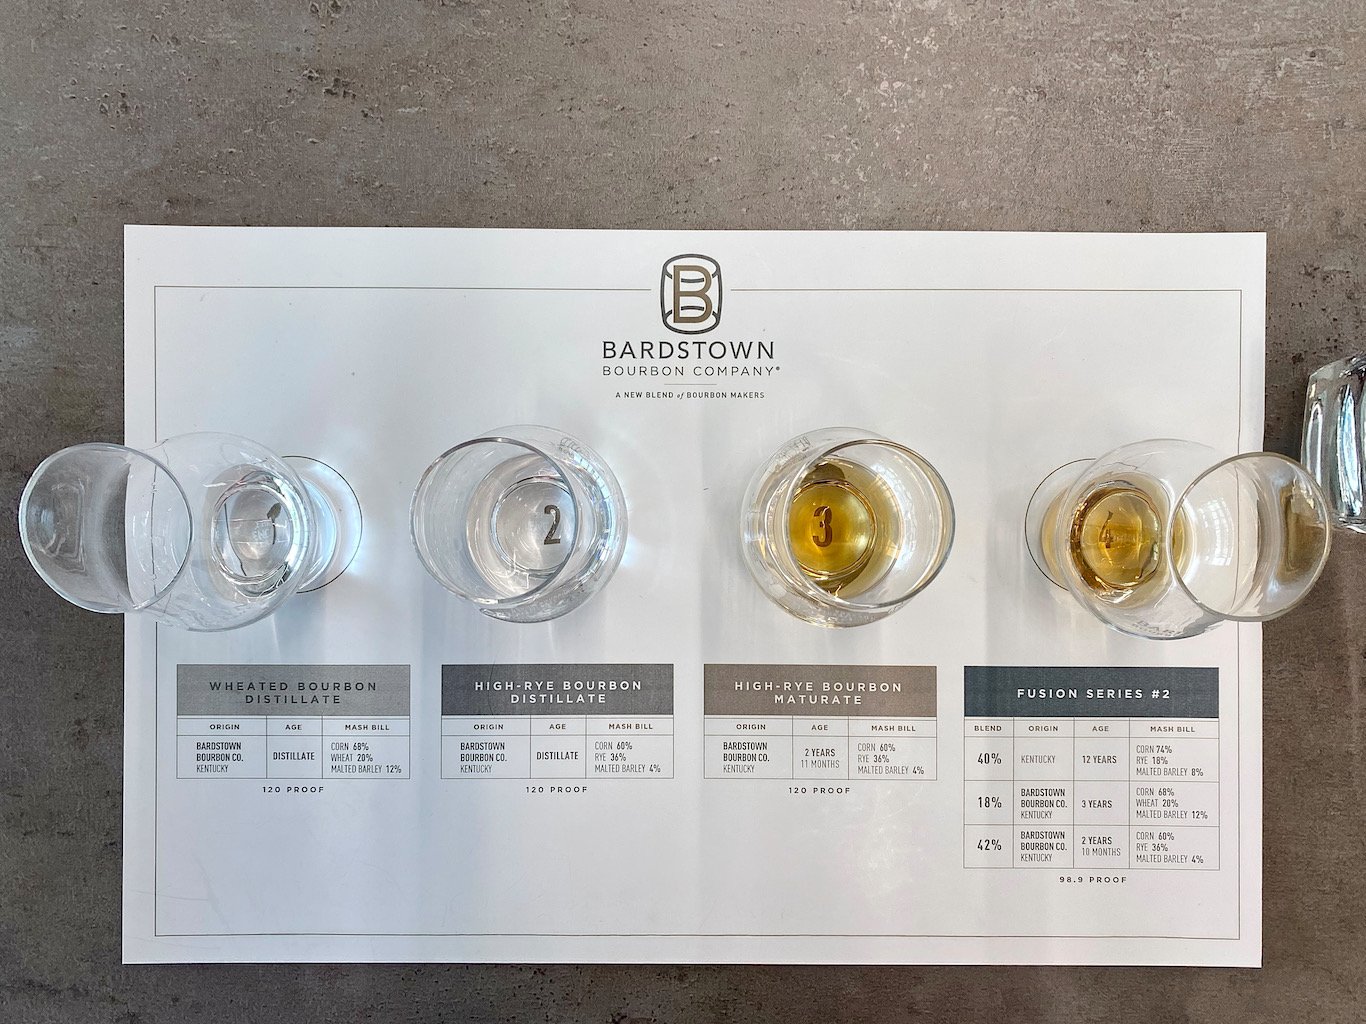 Bardstown Bourbon Company Tasting Set for the  Distillate to Barrel Tour